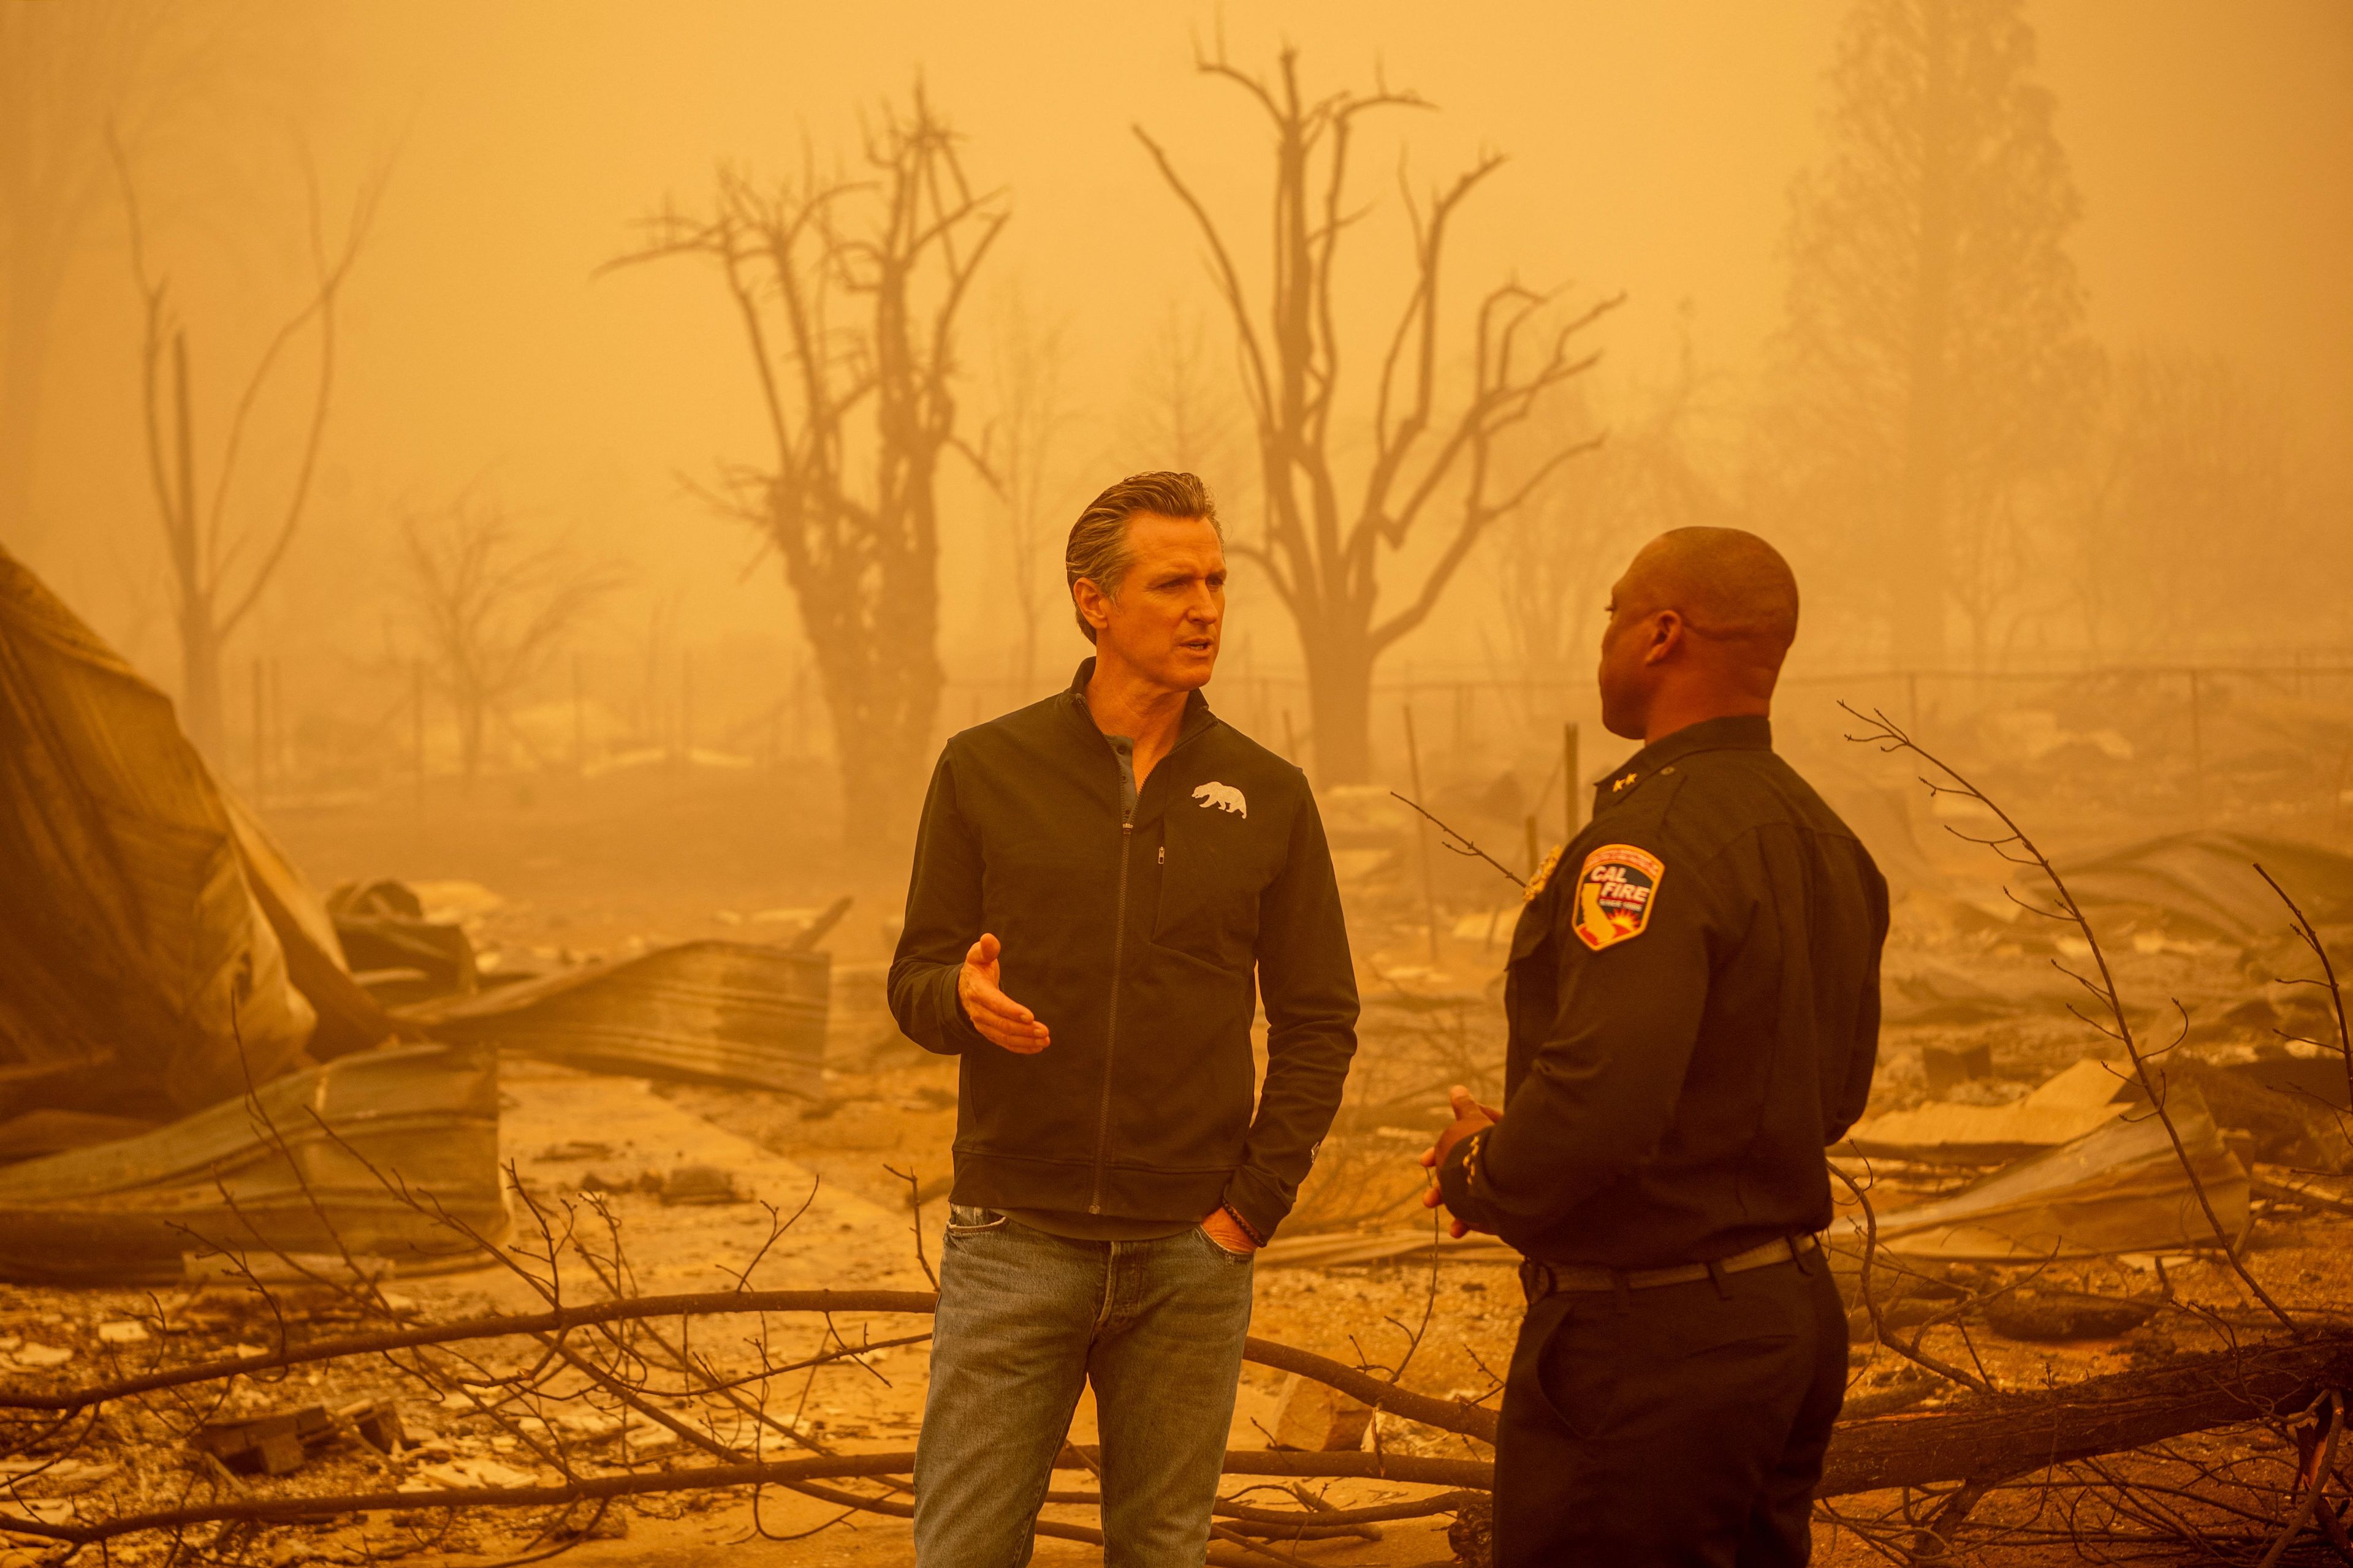 Two men, Gov. Gavin Newsom and a Cal Fire official, stand talking in front a burnt landscape surrounded by orange haze.